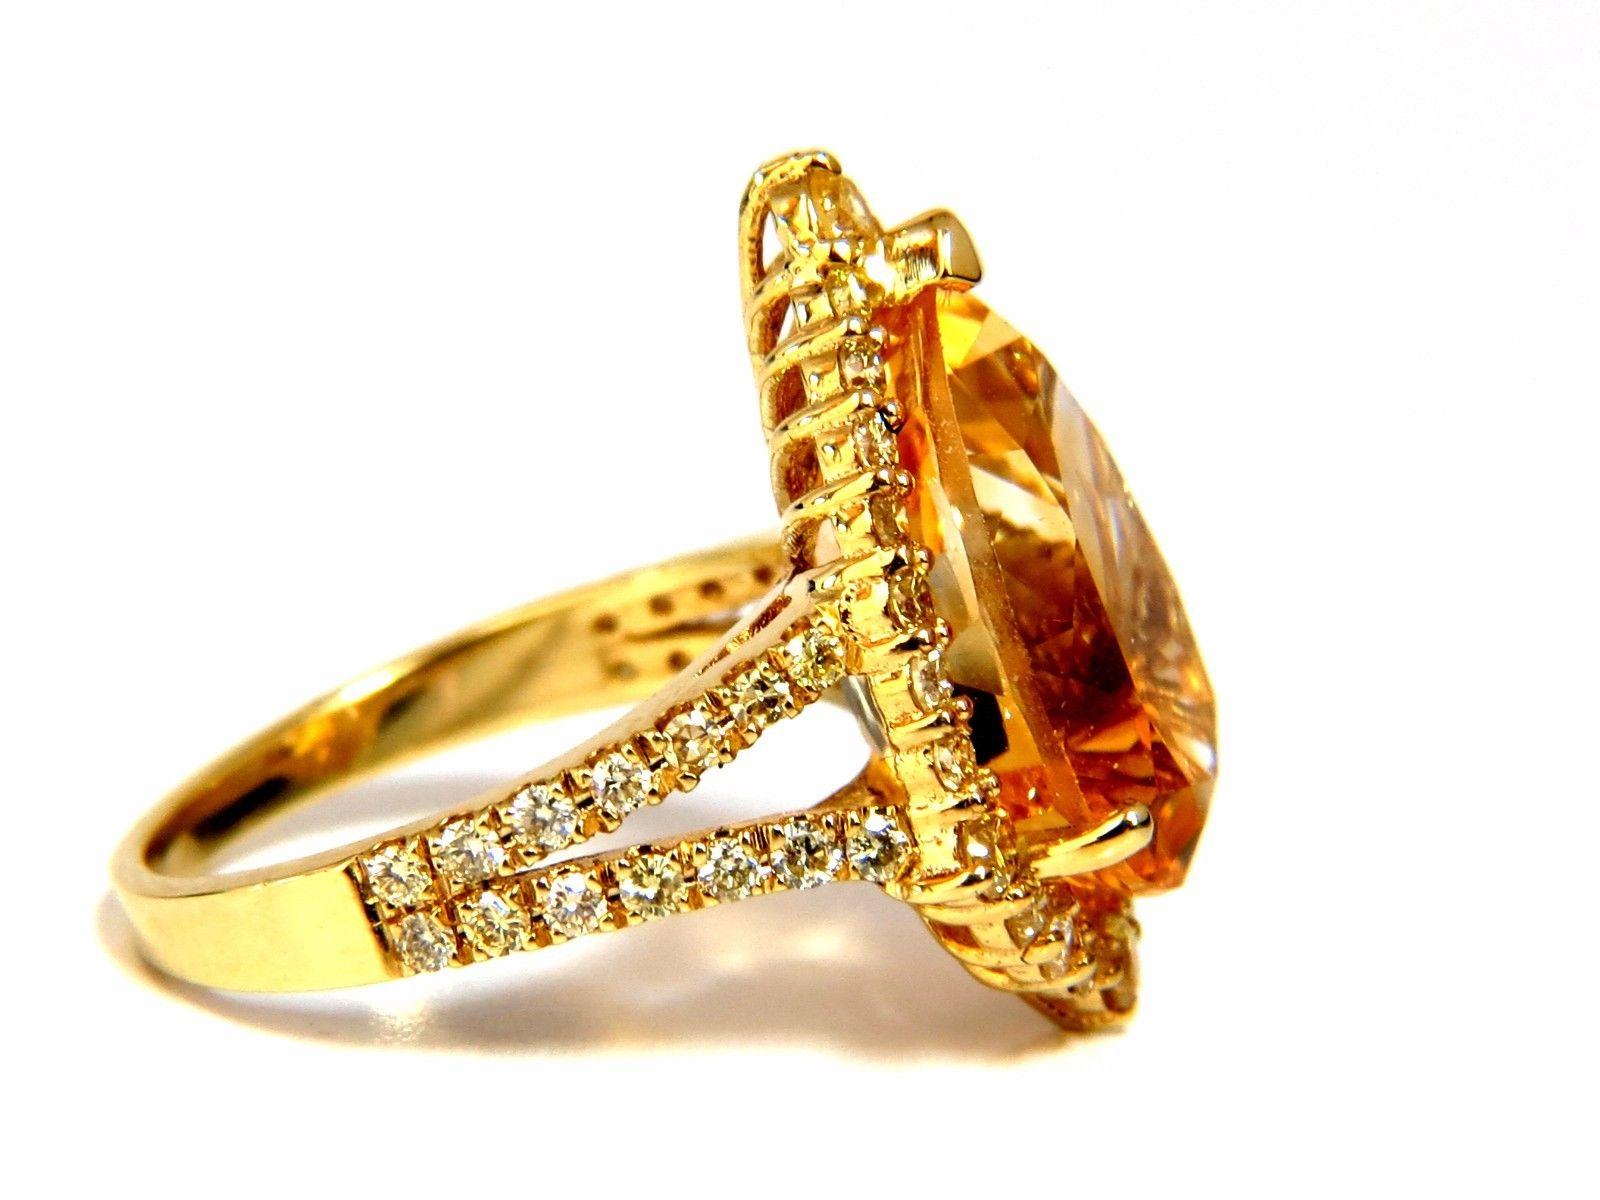 6.50ct. Natural yellow Citrine ring.

Brilliant Vivid Yellow Orange Color

Pear shaped, Brilliant

15mm X 10mm

1.20ct side natural fancy yellow diamonds

Rounds Full cuts

Vs-2 clarity.

14kt. yellow gold

4.8 grams.

Depth of ring: 7.8 mm

current